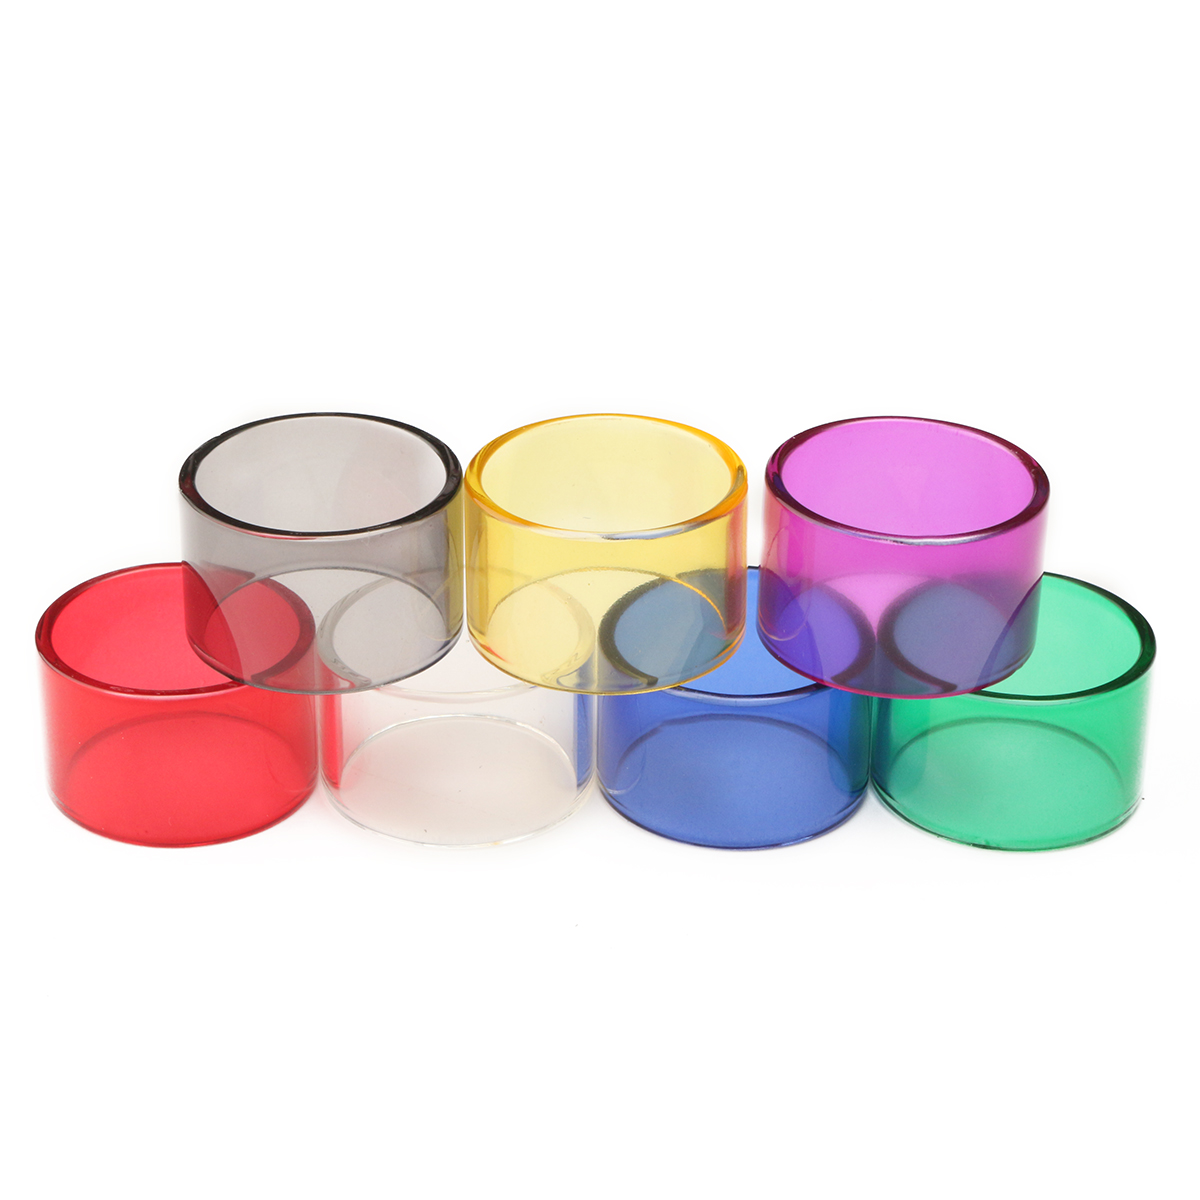 Replacement-Transparent-Pyrex-Glass-Tube-Cap-Tank-24mm-for-Limitless-RDTA-7-Colors-1190027